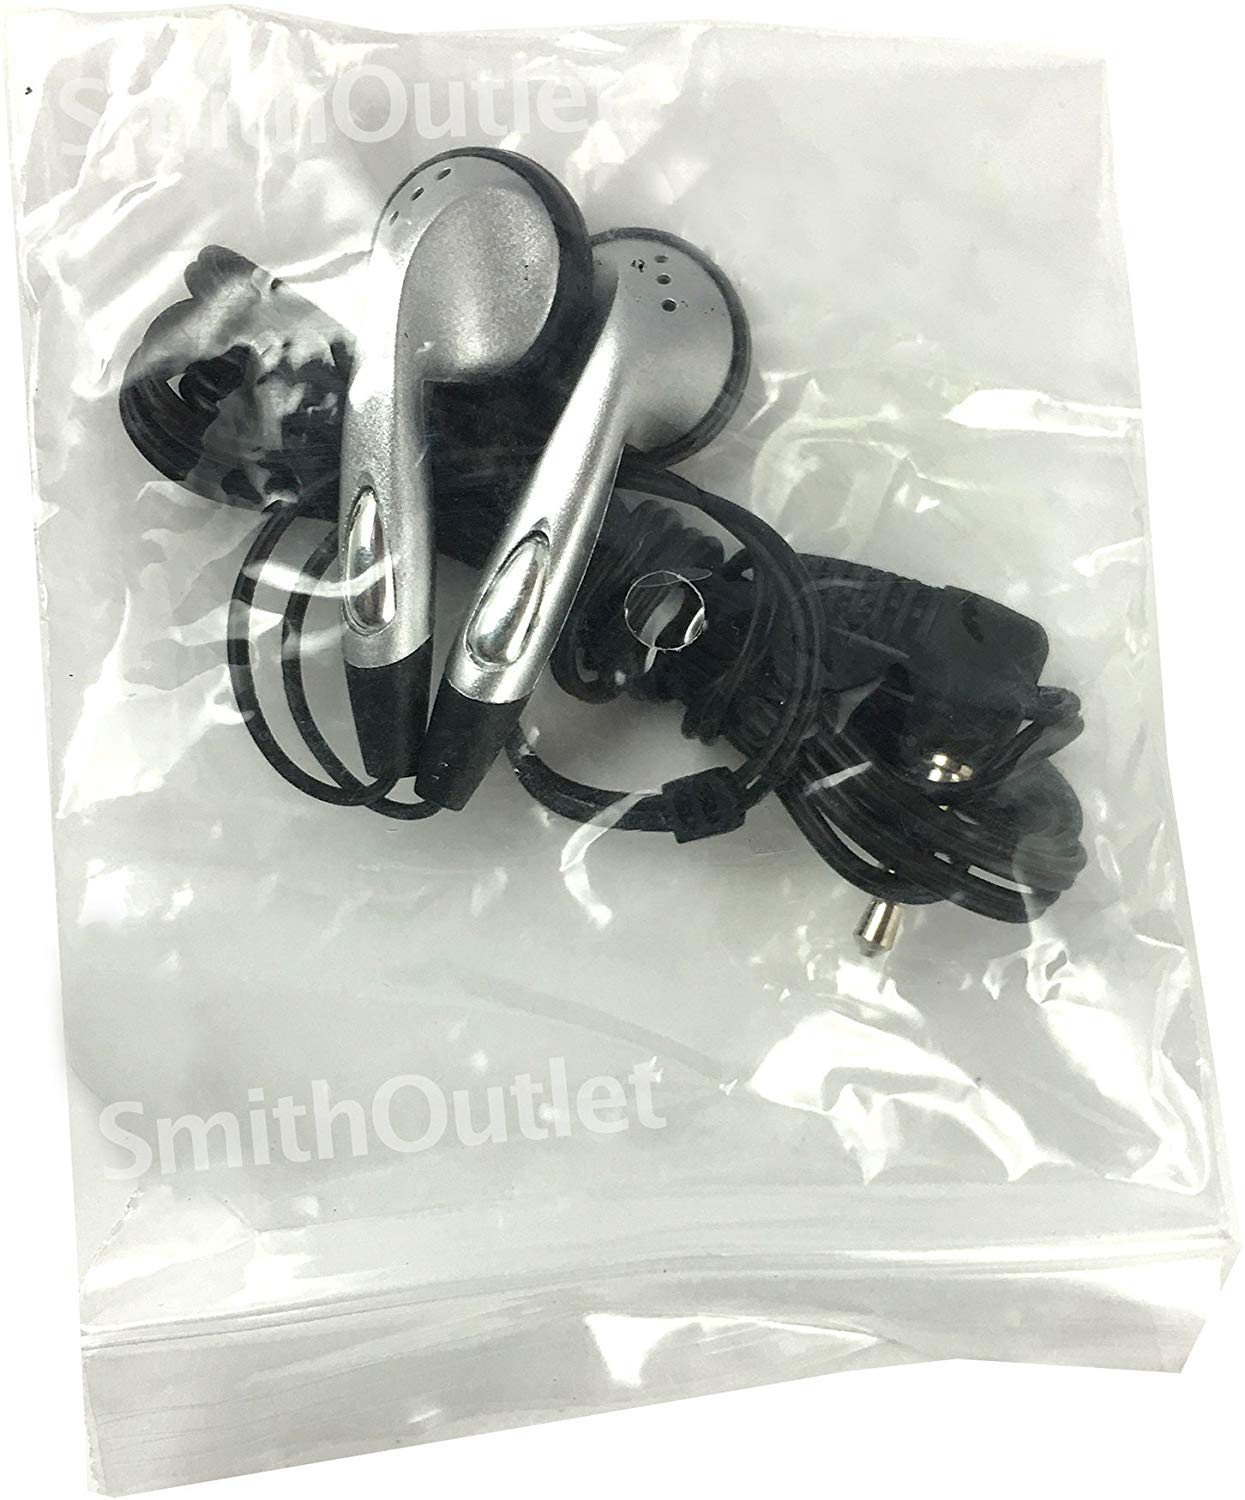 SmithOutlet 200-Pack Silver Earphones Individually Packaged for Bulk Distribution